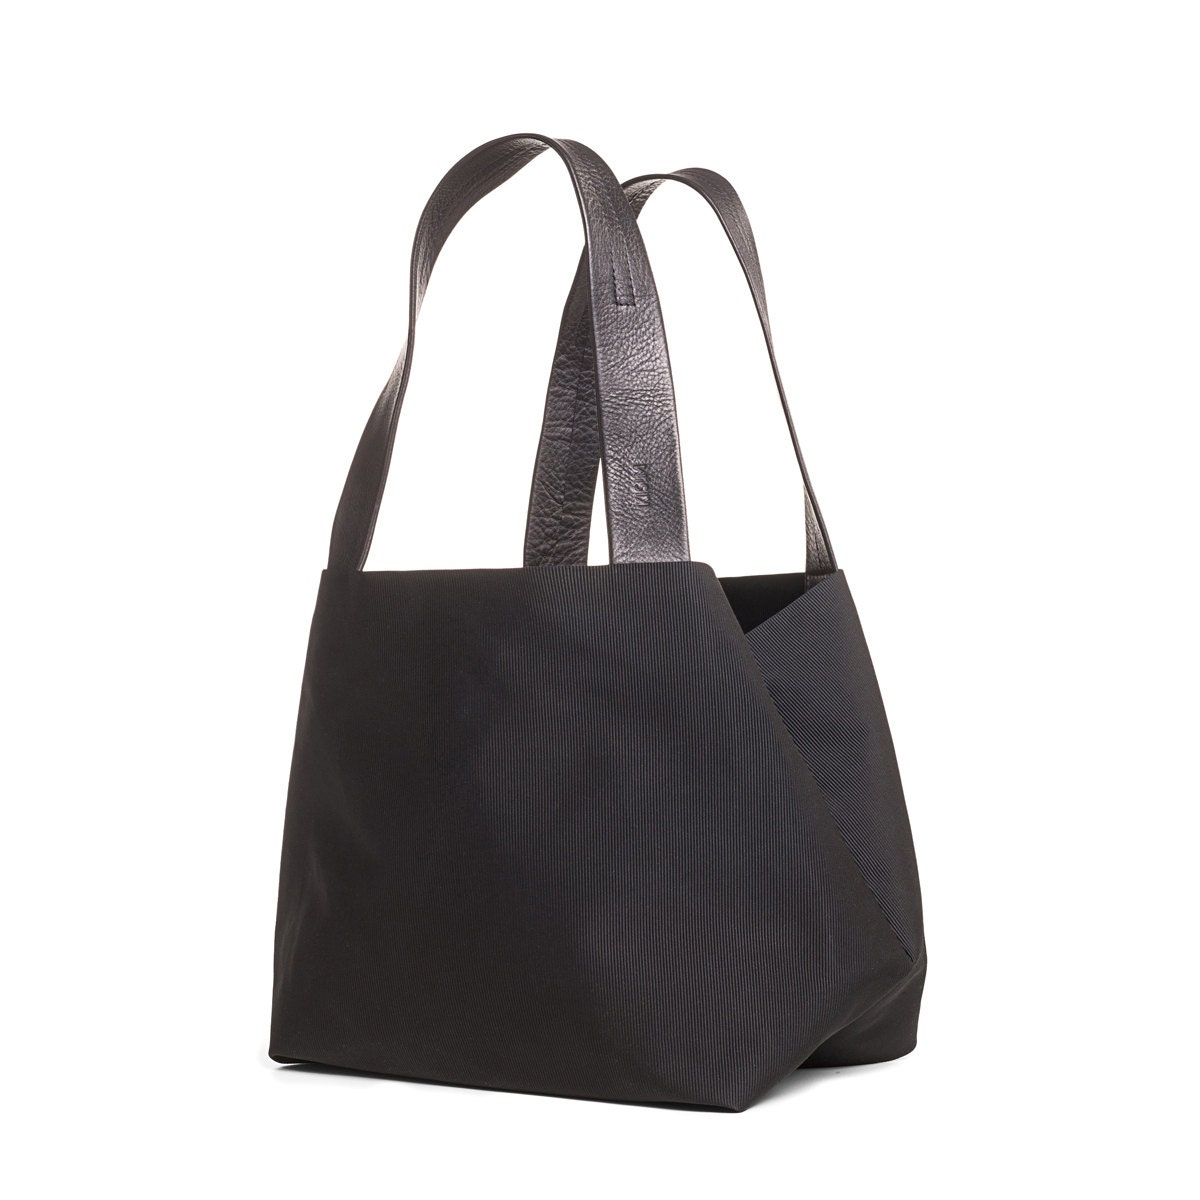 black canvas tote bag black canvas bag small canvas by KisimBags